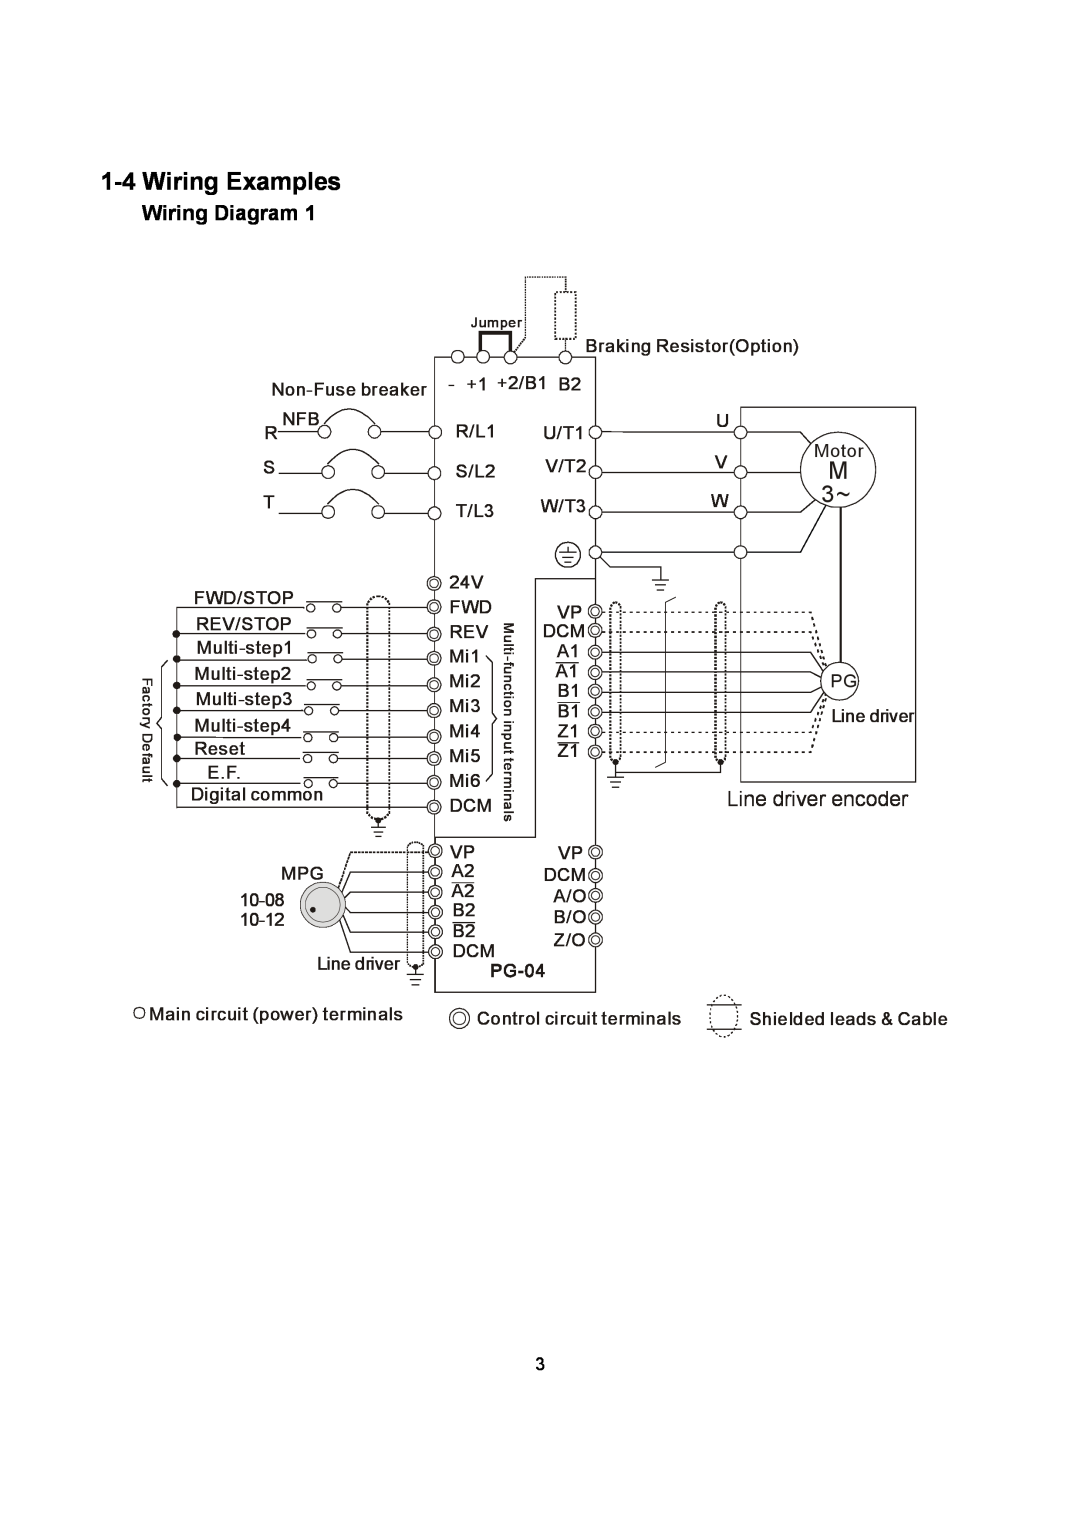 Delta Electronics PG-04 instruction sheet Wiring Examples, Wiring Diagram, Line driver encoder 